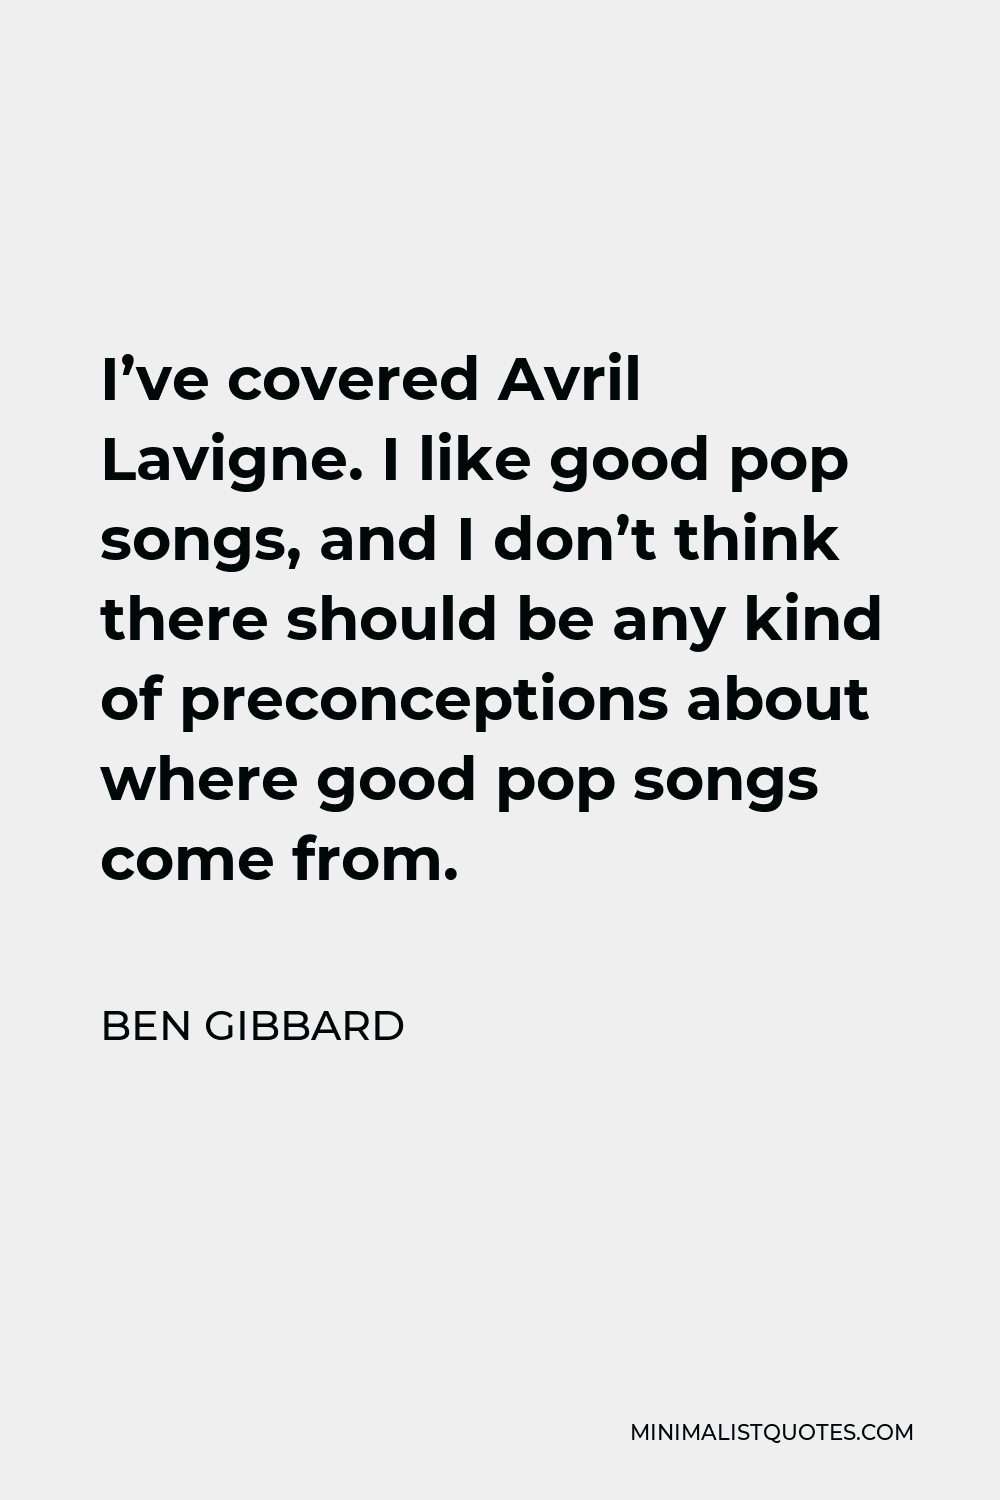 Ben Gibbard Quote - I’ve covered Avril Lavigne. I like good pop songs, and I don’t think there should be any kind of preconceptions about where good pop songs come from.